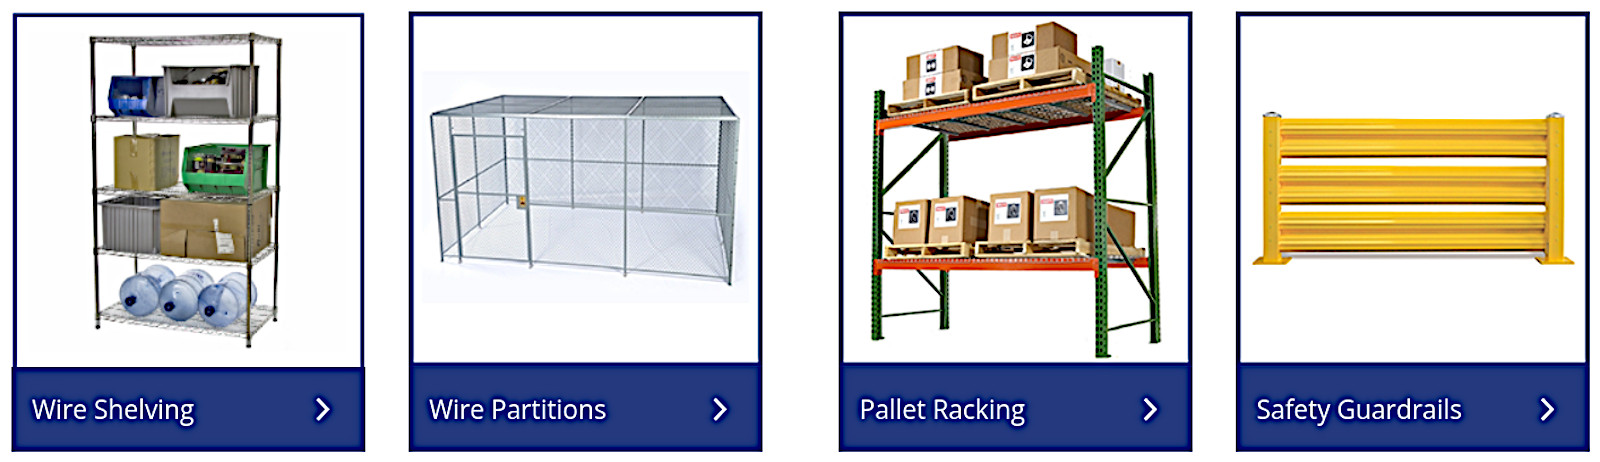 shelves shelving systems economical price